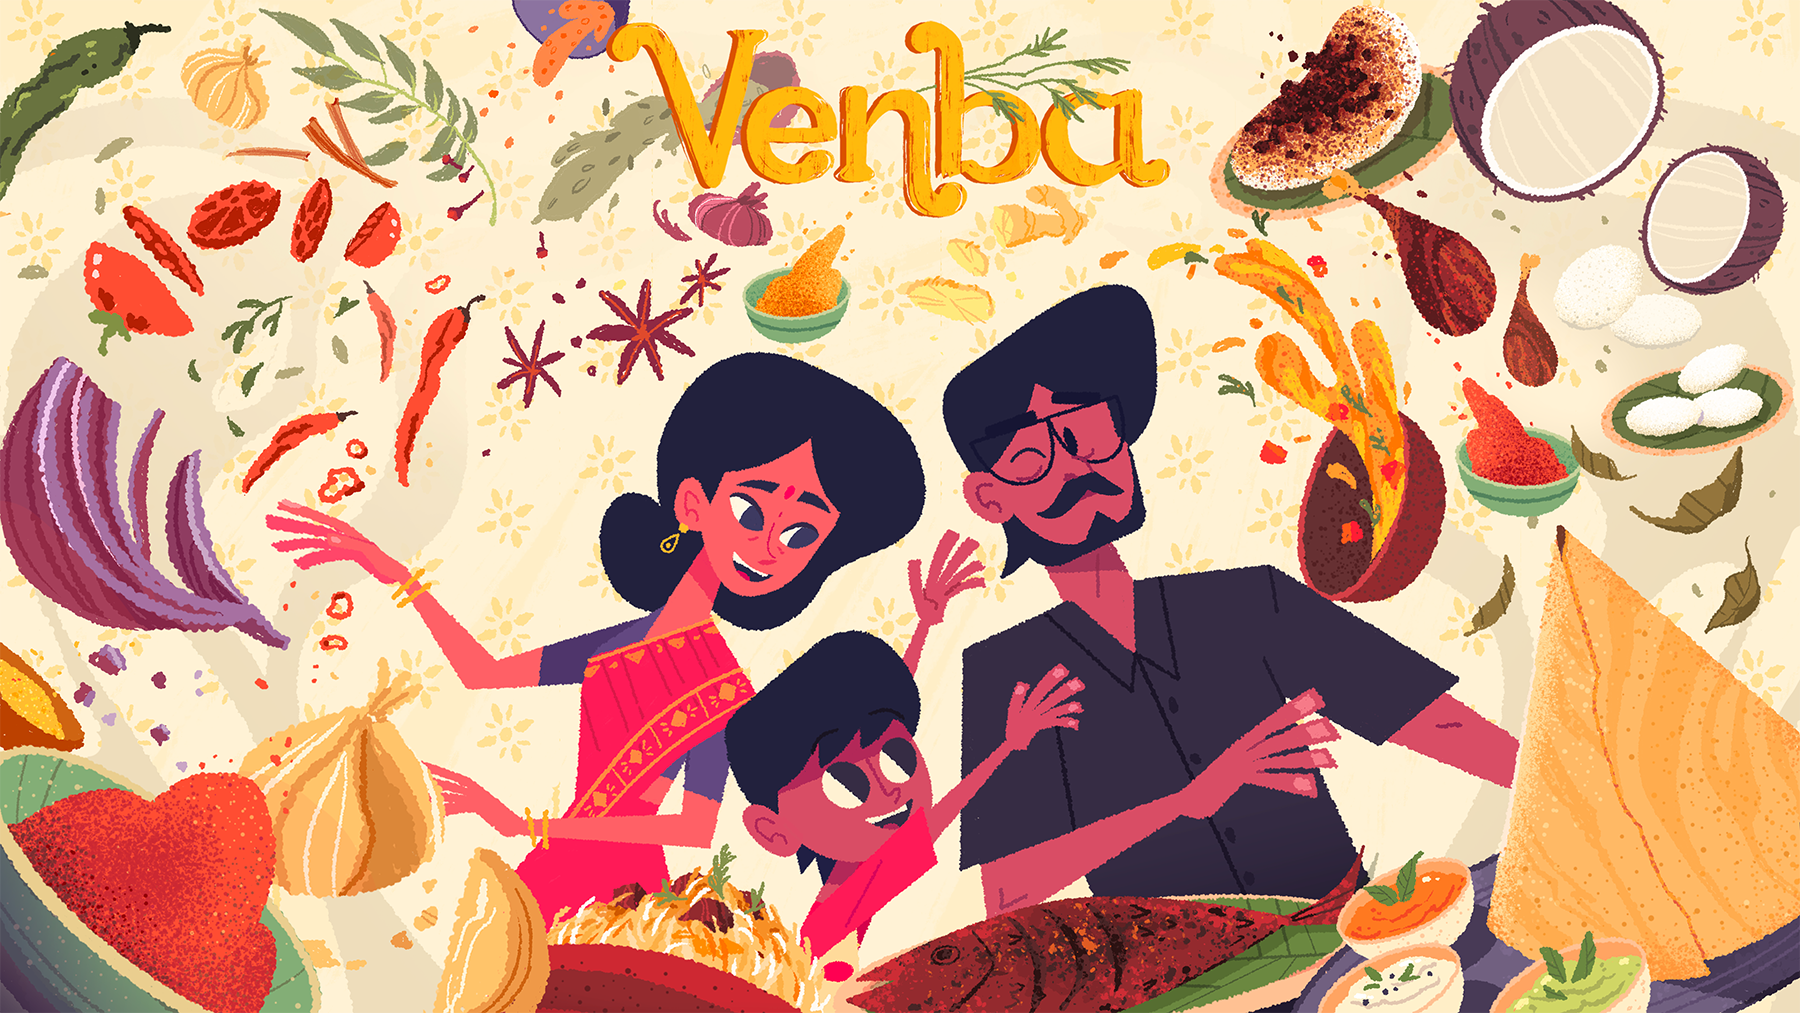 A  promotional image for Venba showing an Indian Mother, Son, and Father cooking together